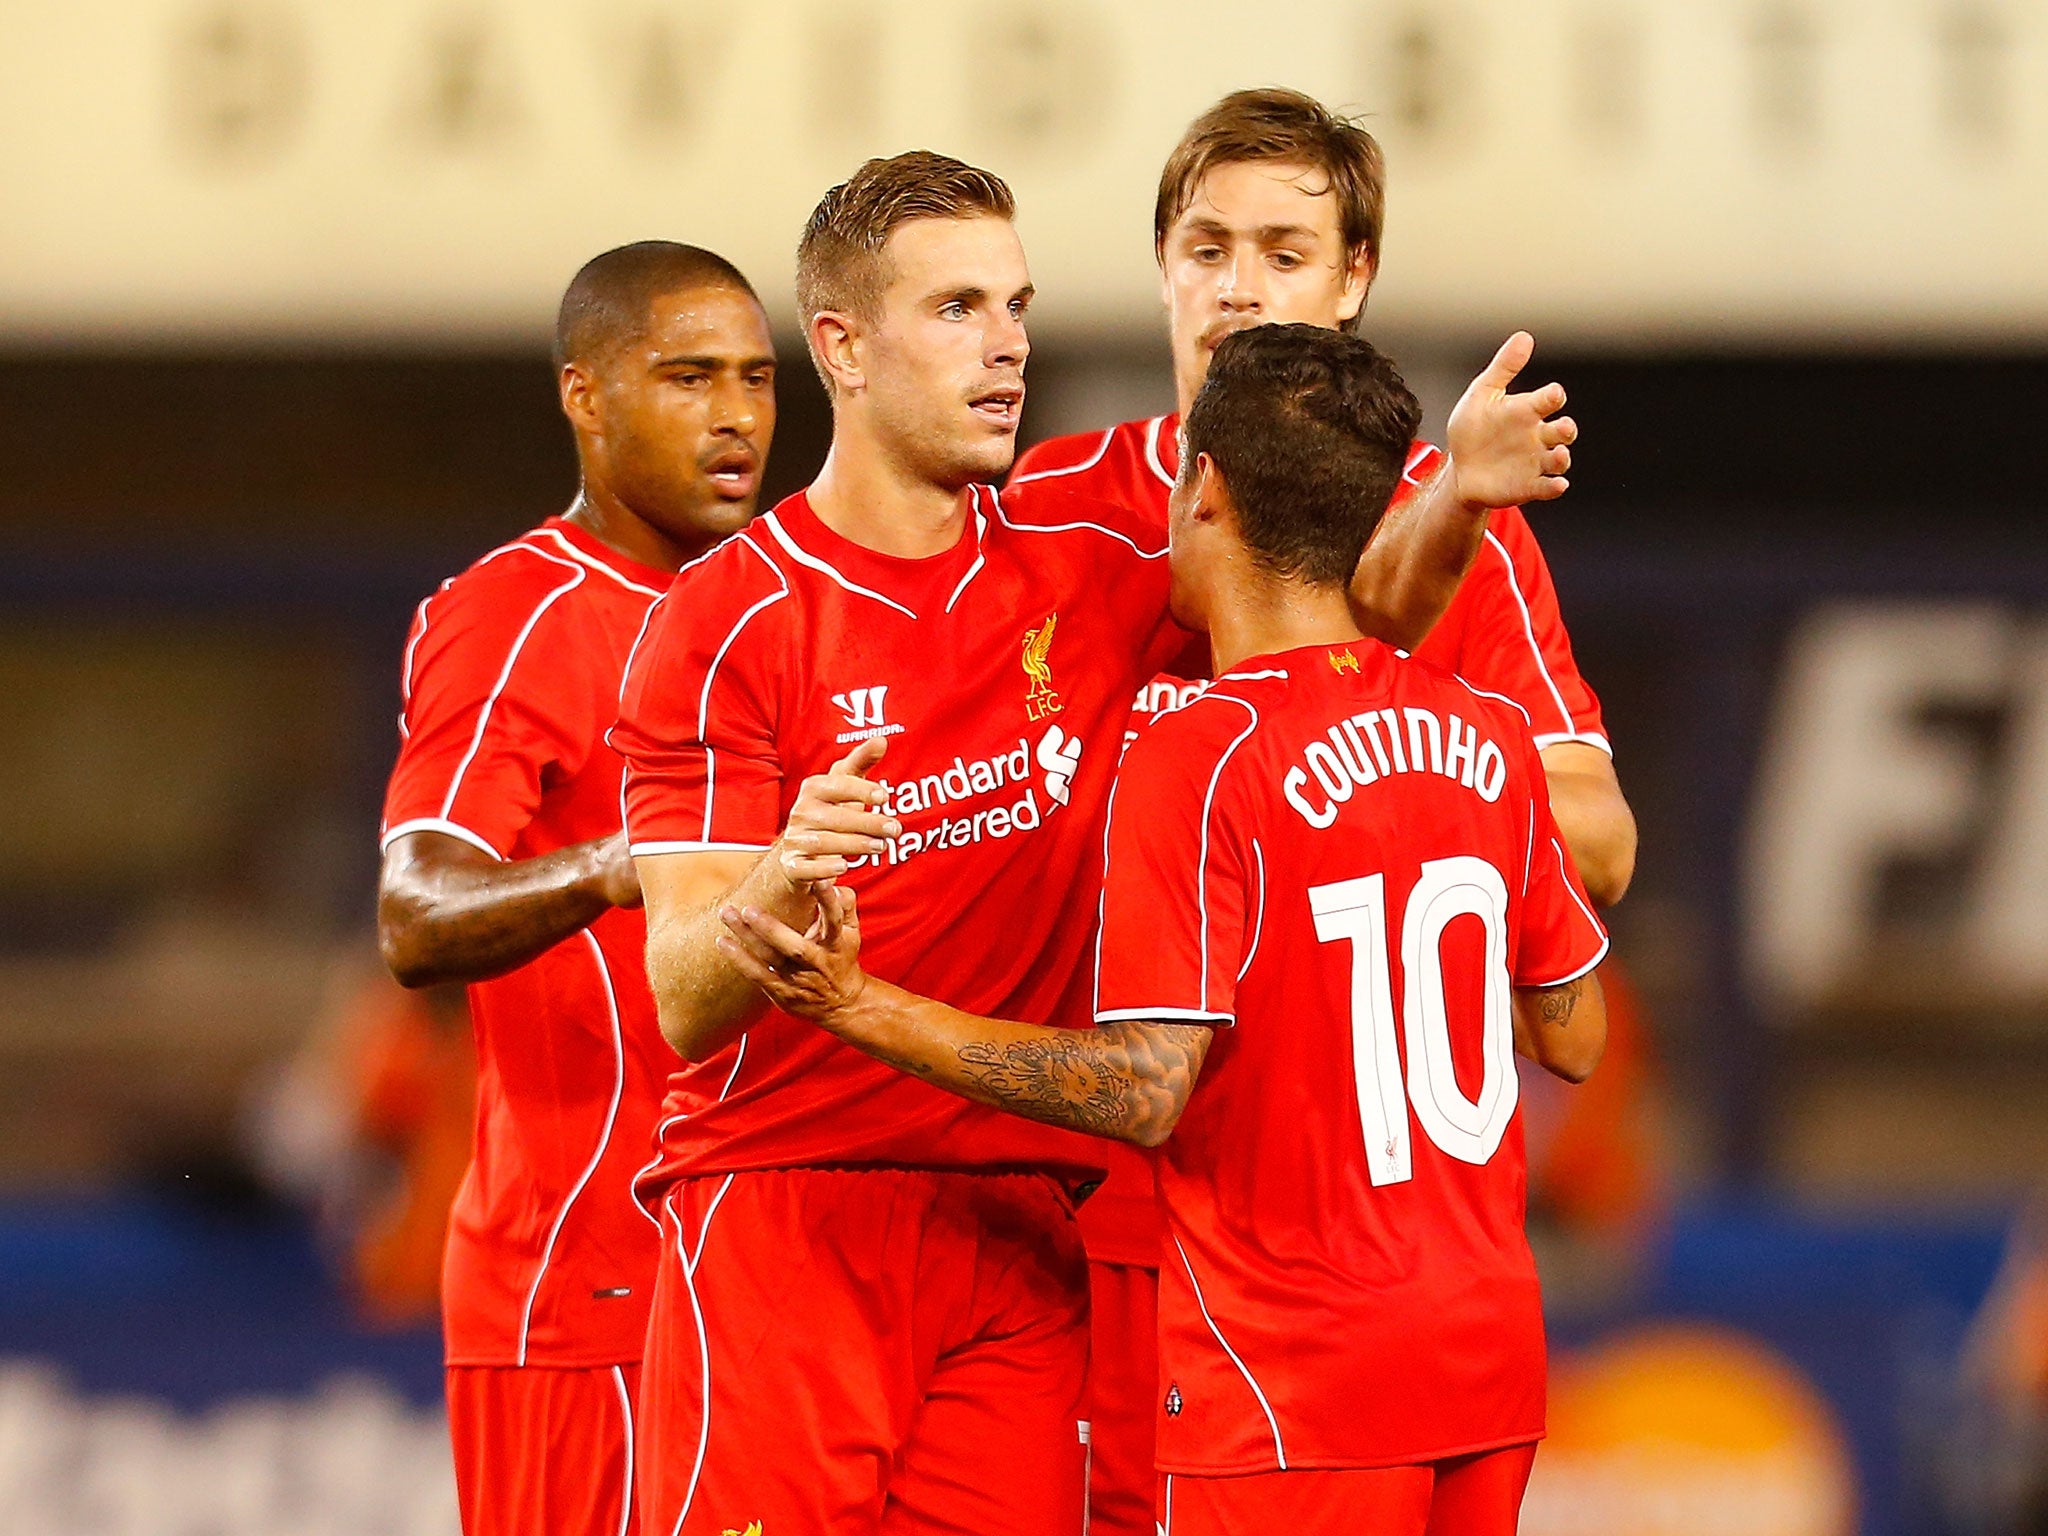 Jordan Henderson celebrates scoring for Liverpool against Manchester City in the International Champions Cup in New York